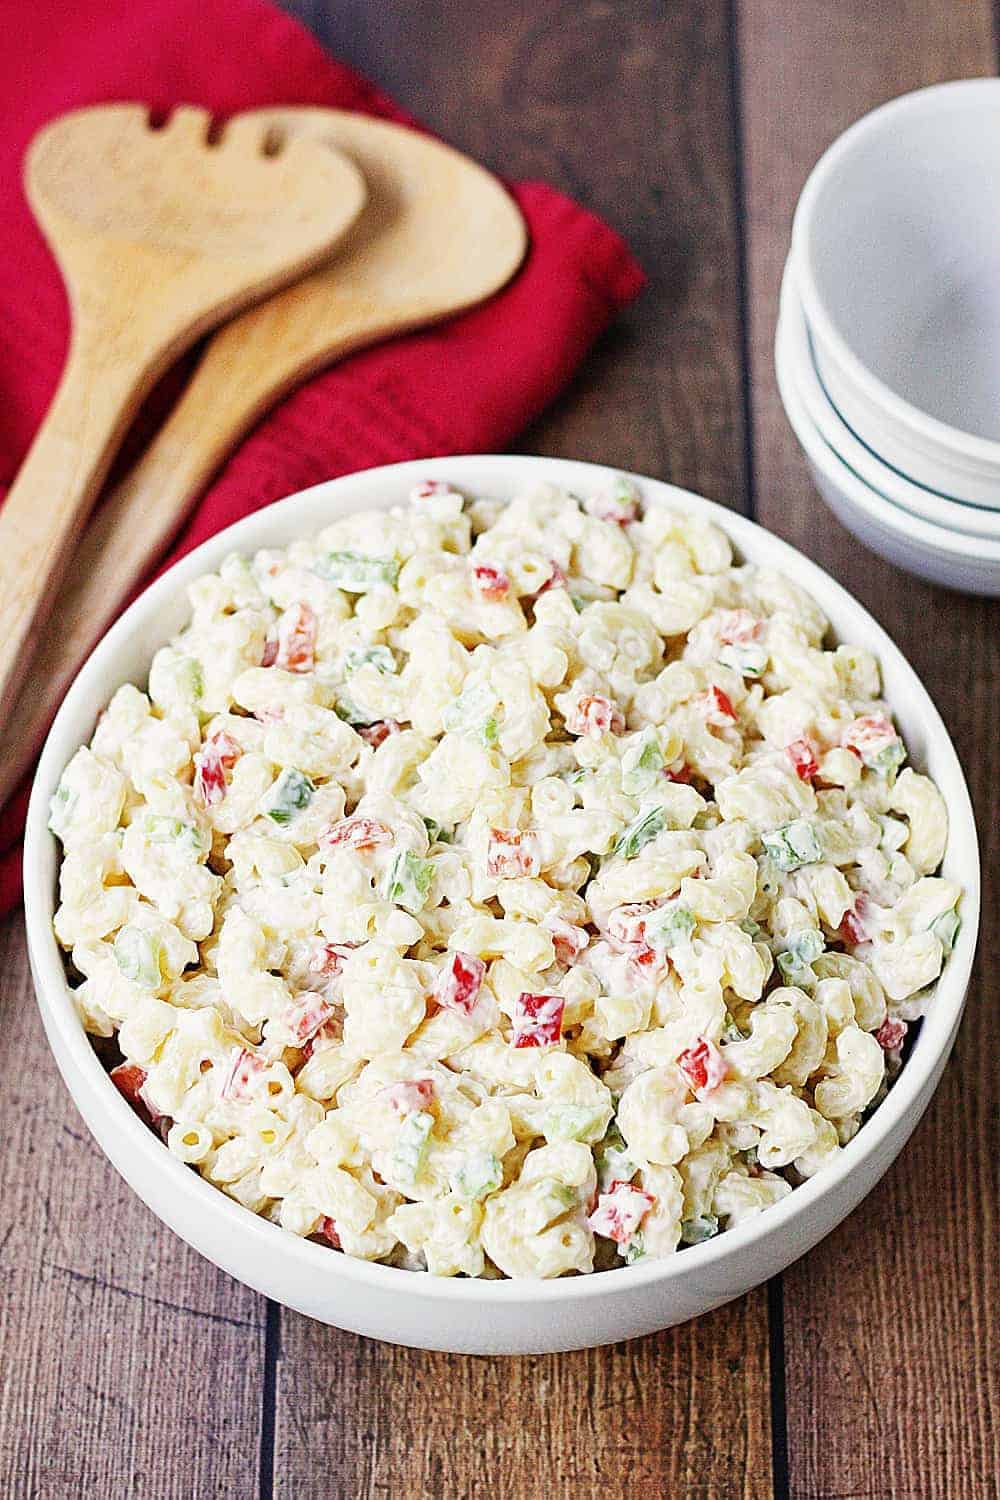 Best Ever Macaroni Salad -- Who knew macaroni salad could be incredibly easy AND incredibly delicious? This macaroni salad is just that with the perfect blend of veggies and creamy dressing with a surprise ingredient! | halfscratched.com